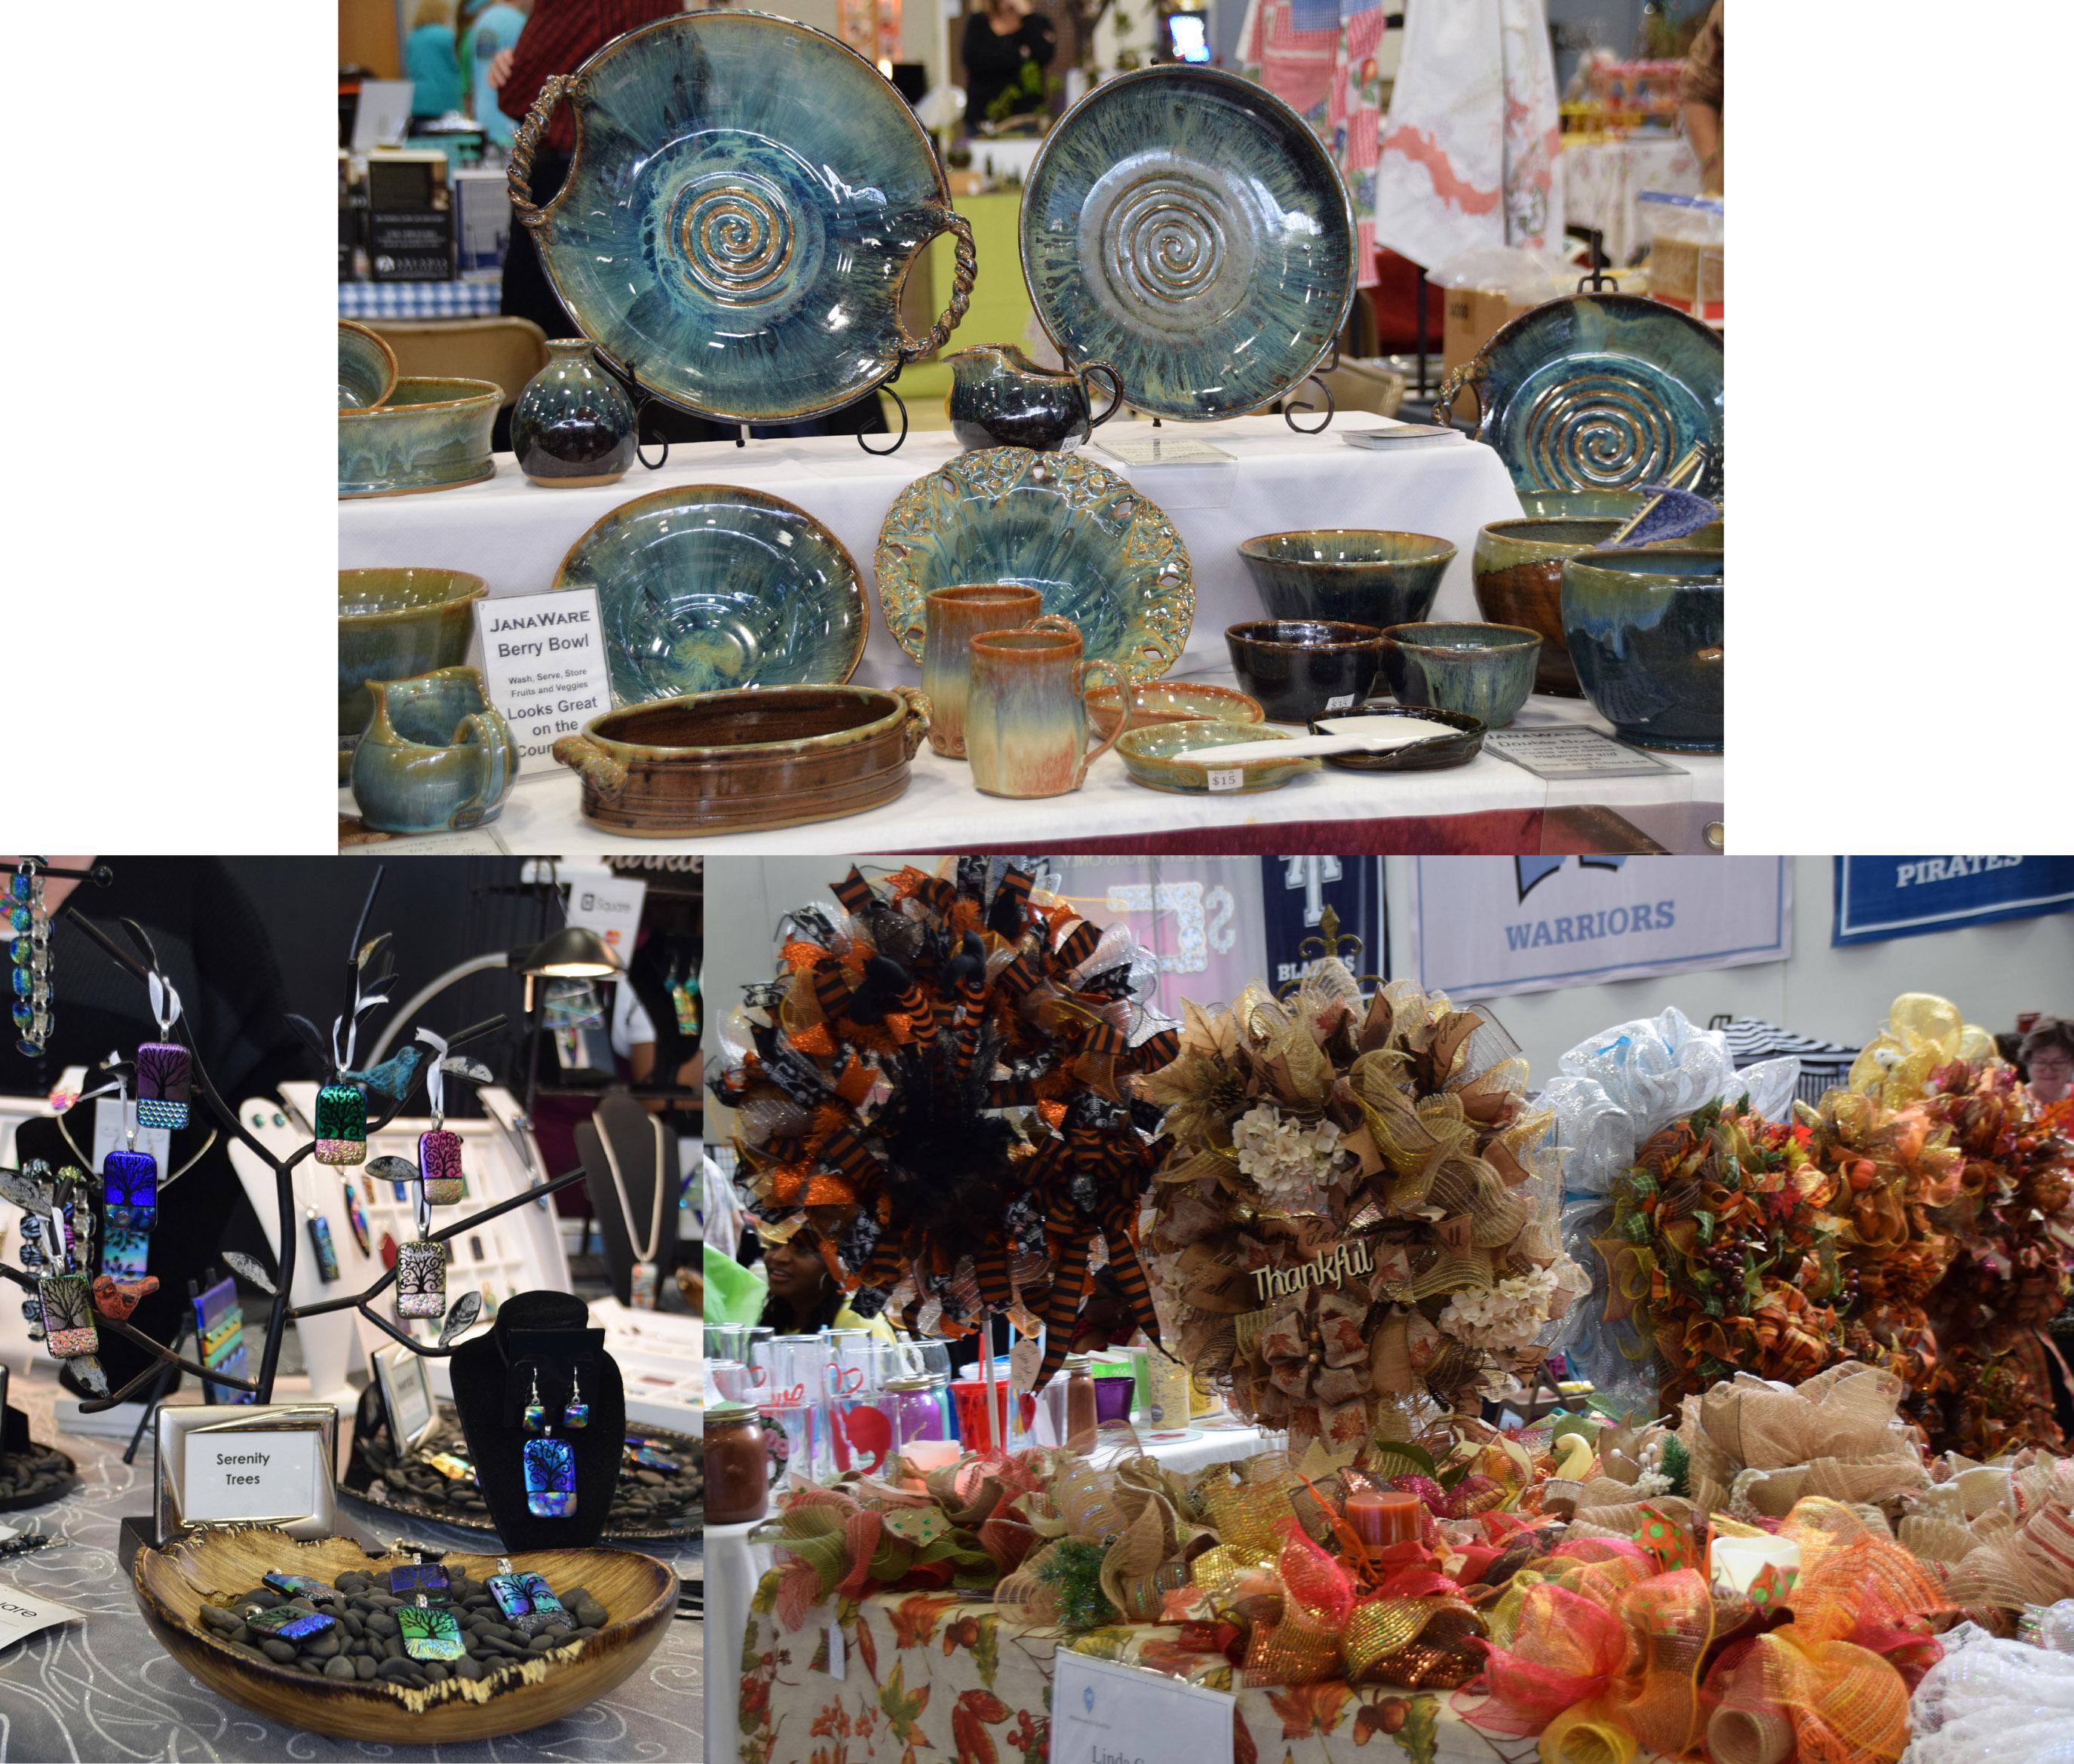 Save the date for the Willowbrook Parent Organization Craft Fair: Vendors can apply by Nov. 4